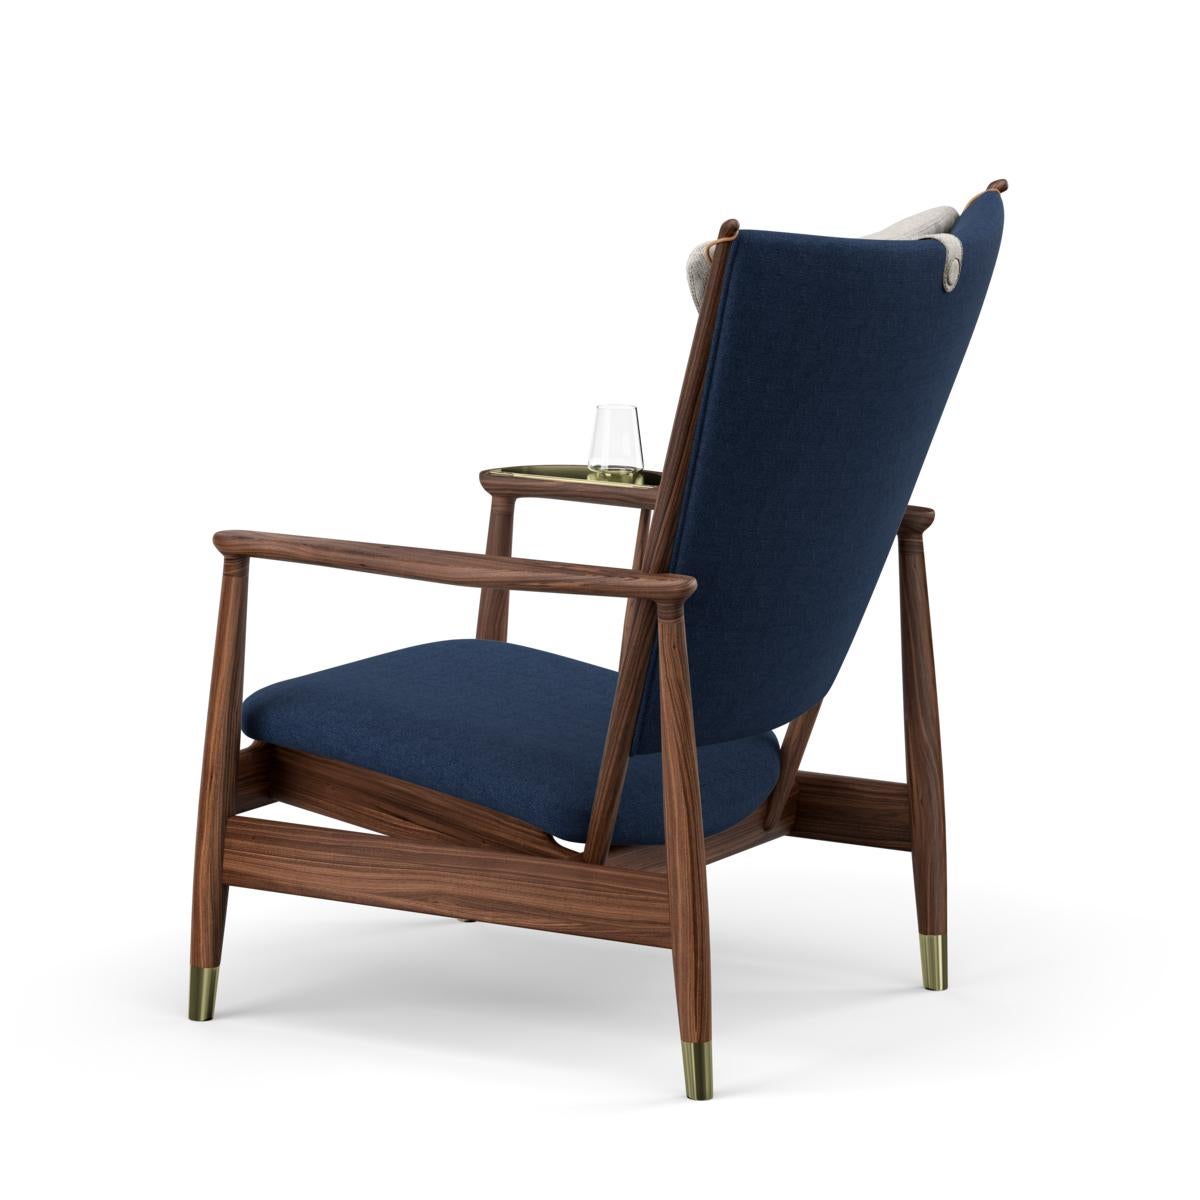 The Whisky chair was designed by Finn Juhl in 1948 and is characterized by his artistic sense of shape, function, and detail. 

The chair is produced in American walnut and is upholstered by hand in leather and/or textile. Furthermore, the chair is